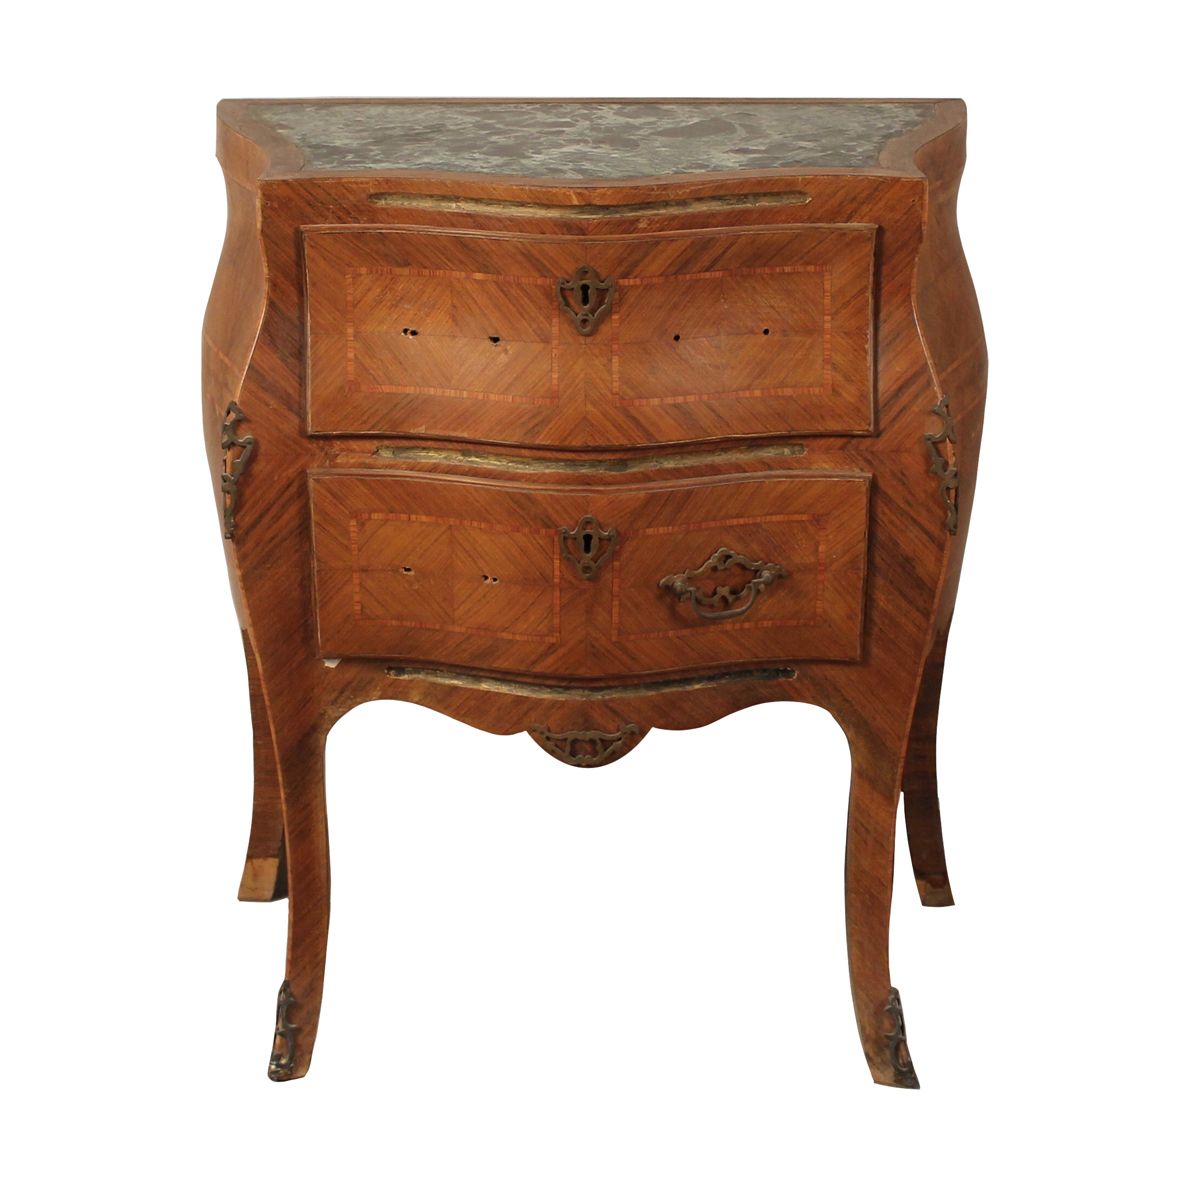 CASSETTONCINO A DUE CASSETTI - SMALL COMMODE WITH TWO DRAWERS Rosewood with pink&hellip;